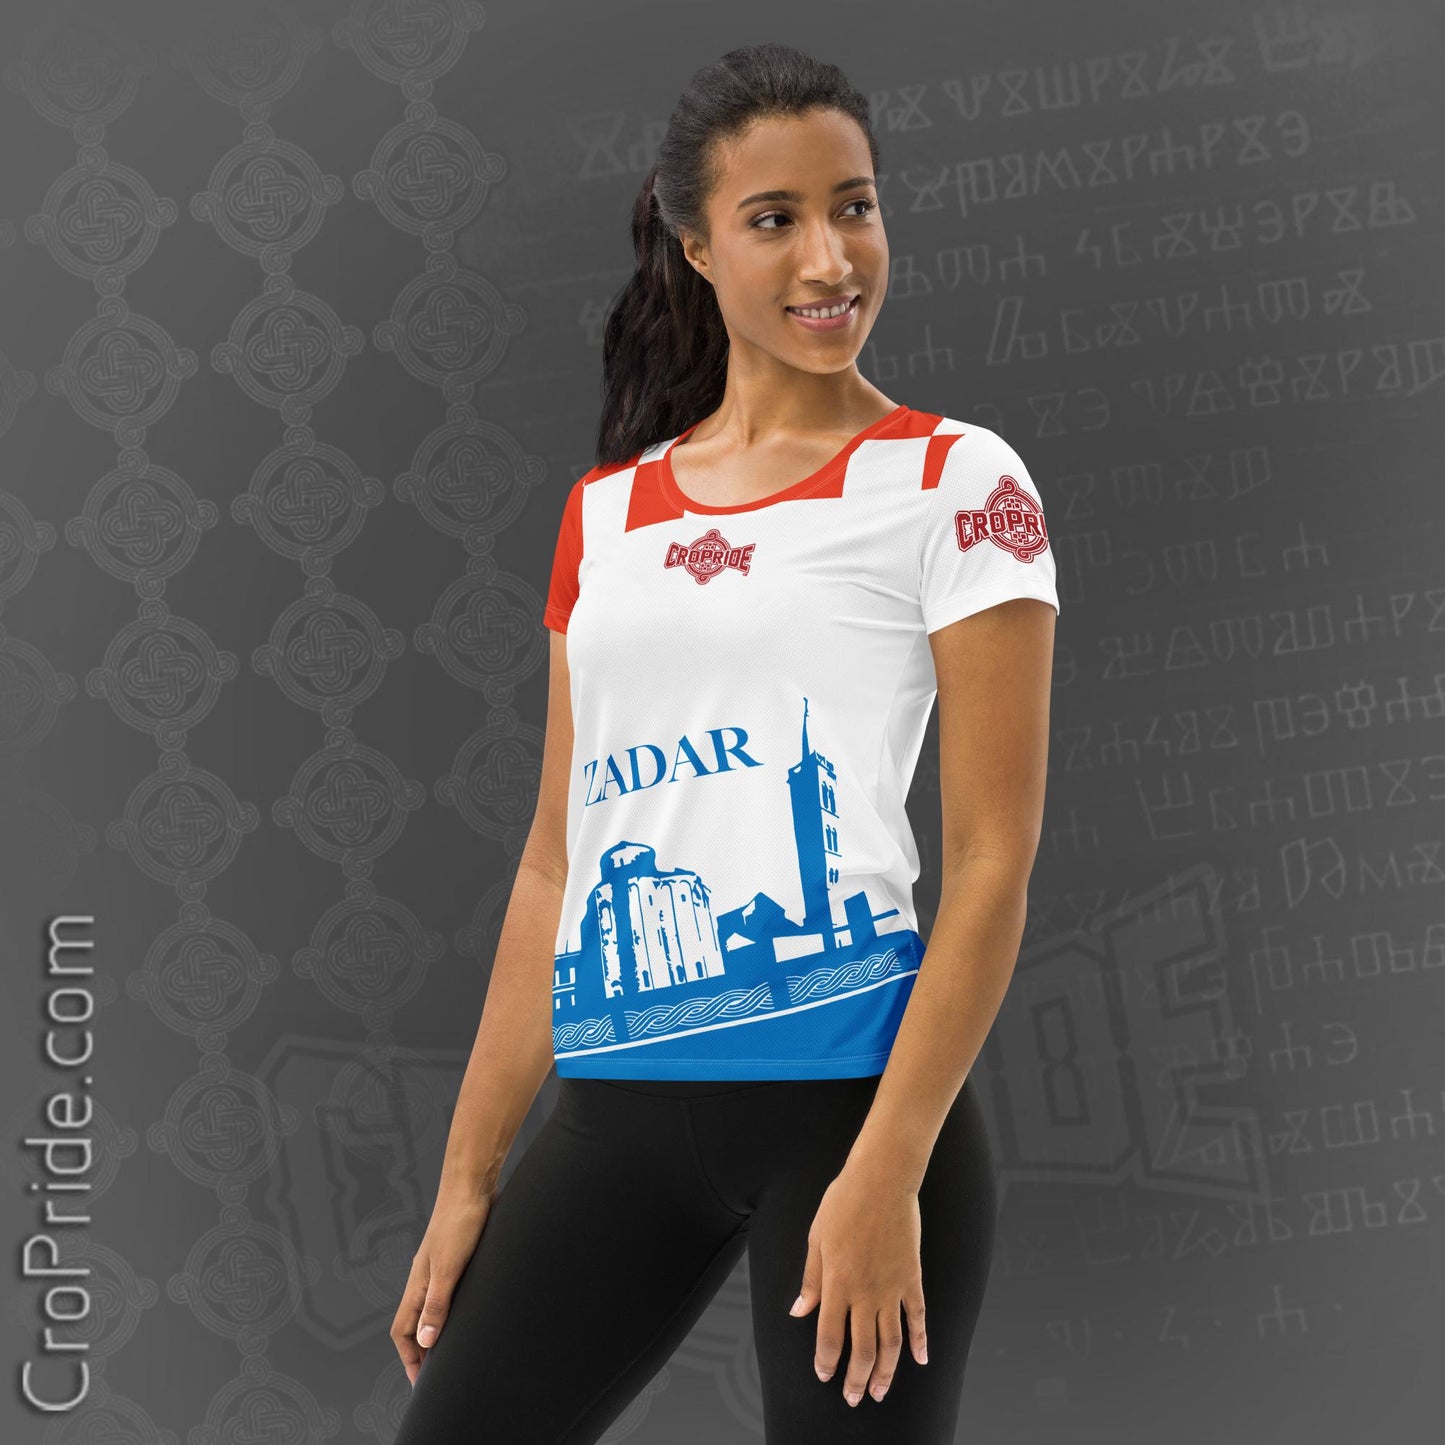 Zadar-Unleash Your Passion with CroPride Gear Designed Jersey